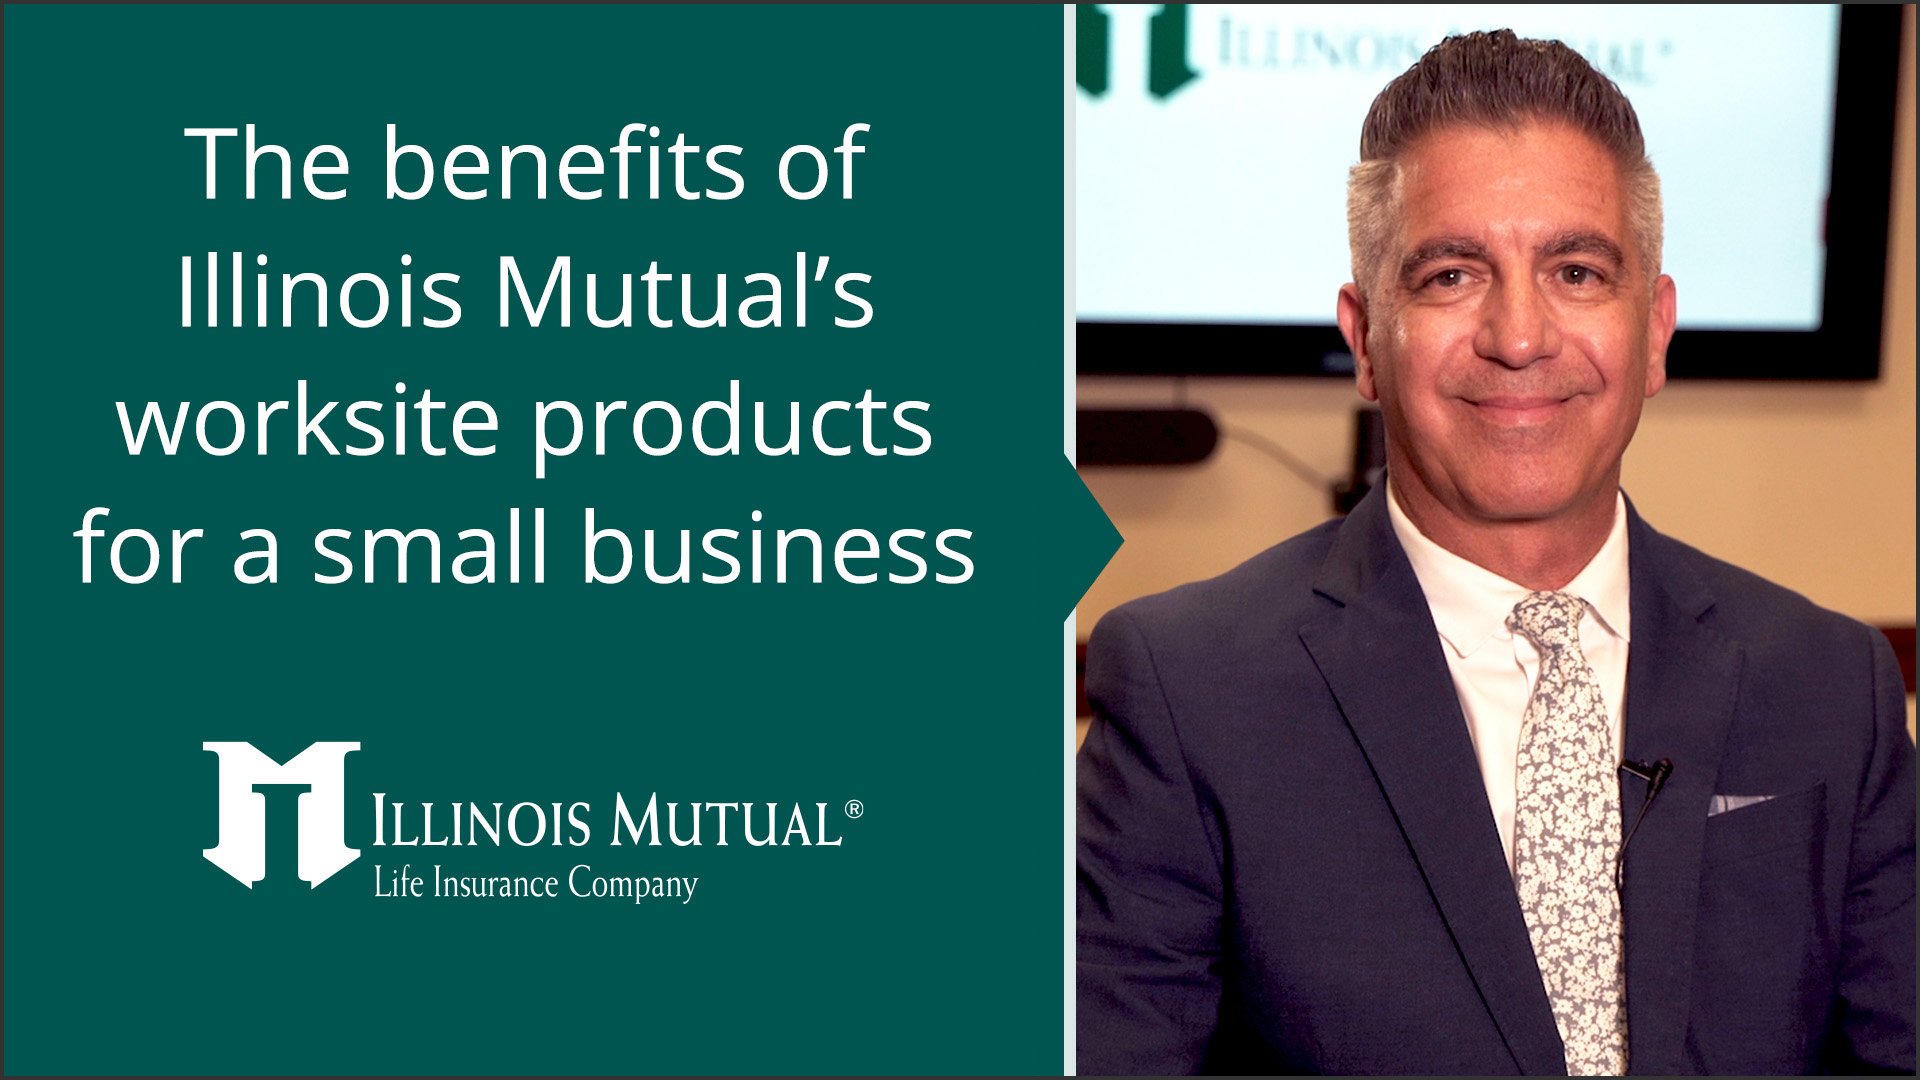 video thumbnail of man speaking with title showing - the benefit of Illinois Mutual's worksite products for a small business